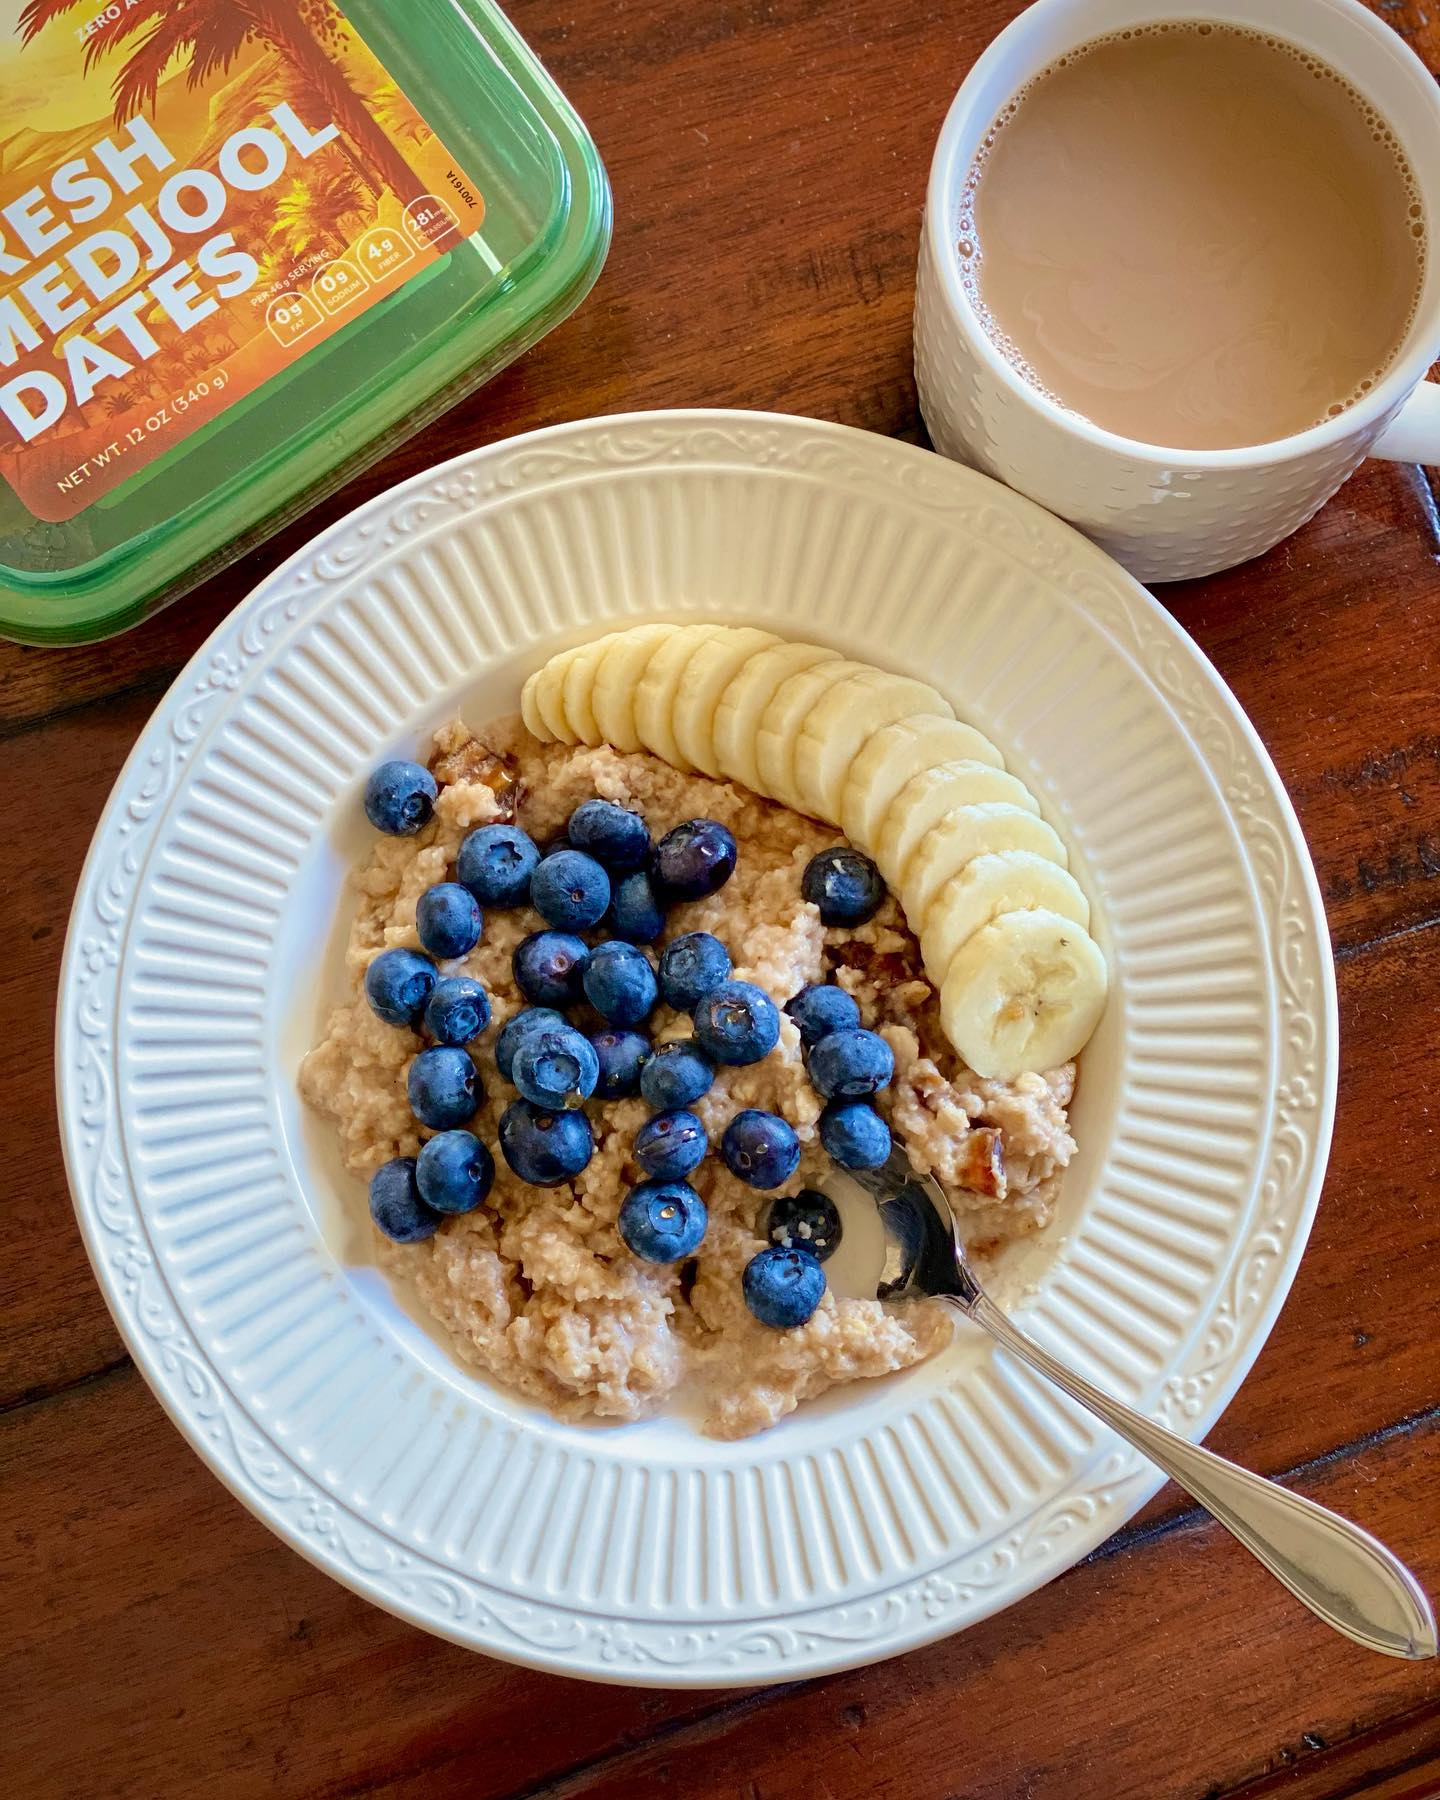 Spiced Oatmeal Bowl with Medjool Dates